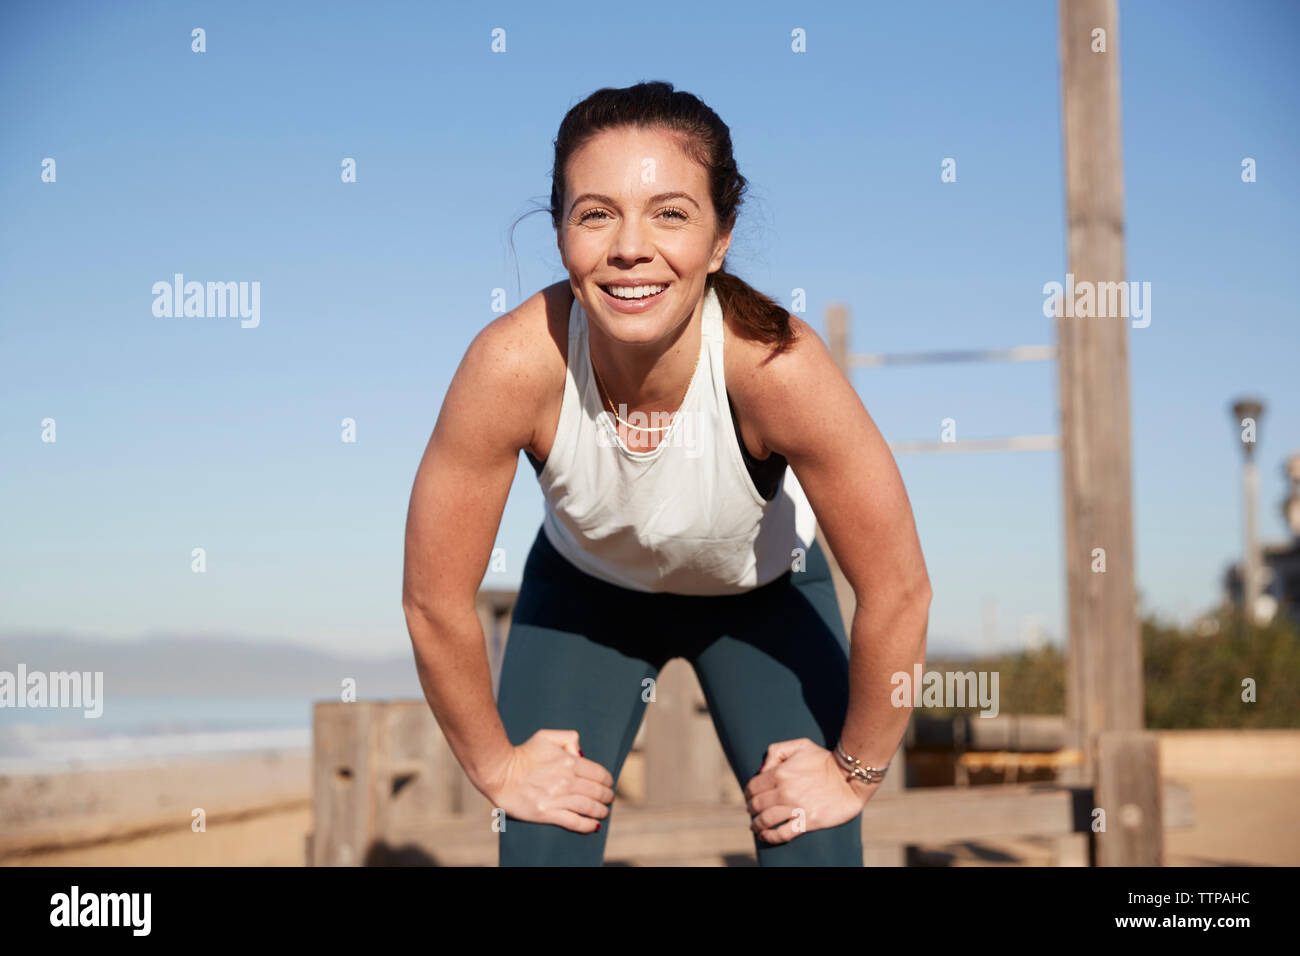 Portrait of smiling woman exercising at beach Stock Photo